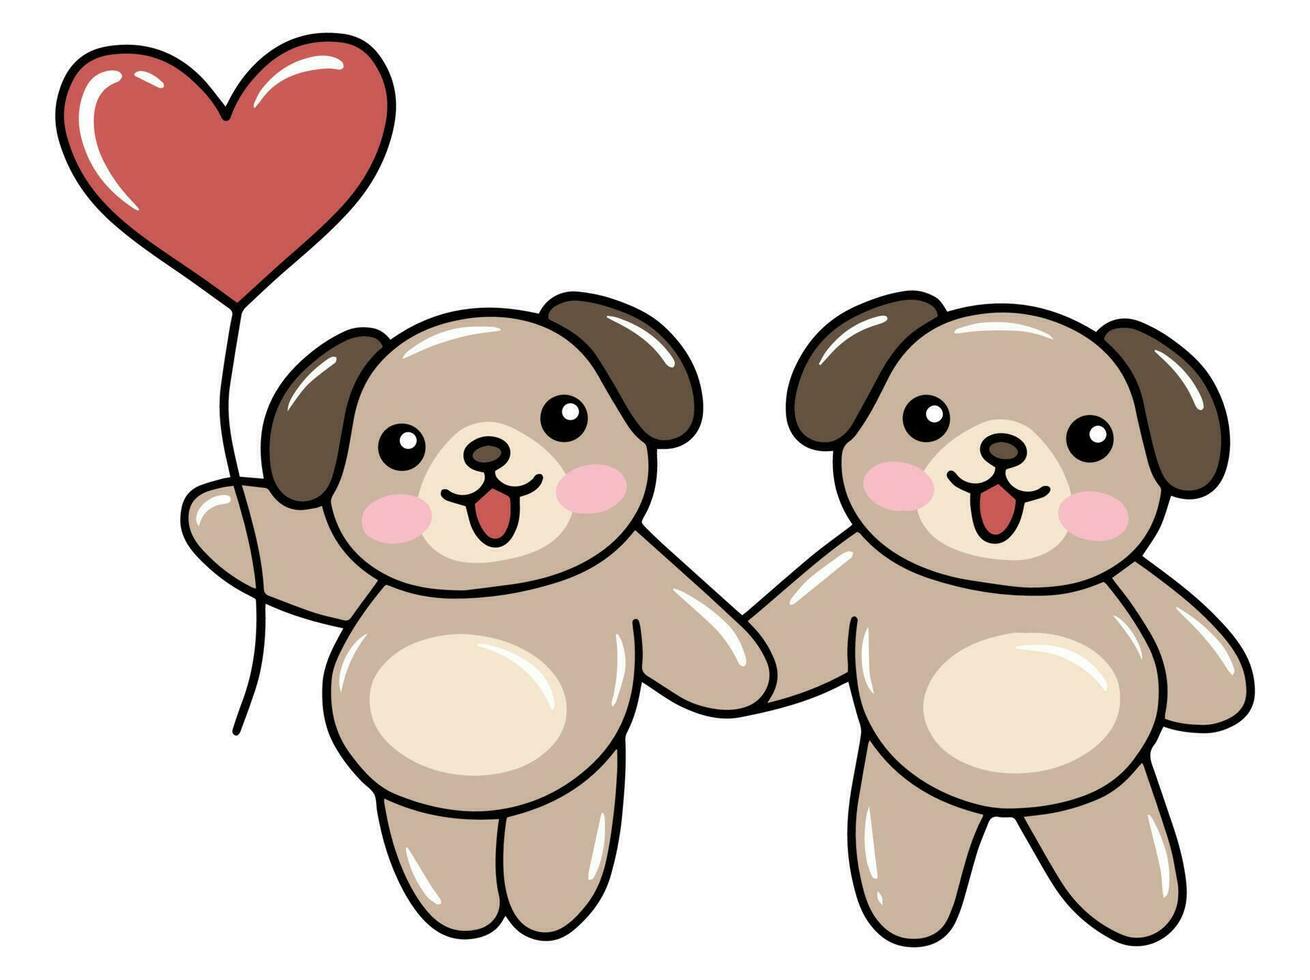 Dog Cartoon Cute for Valentines Day vector